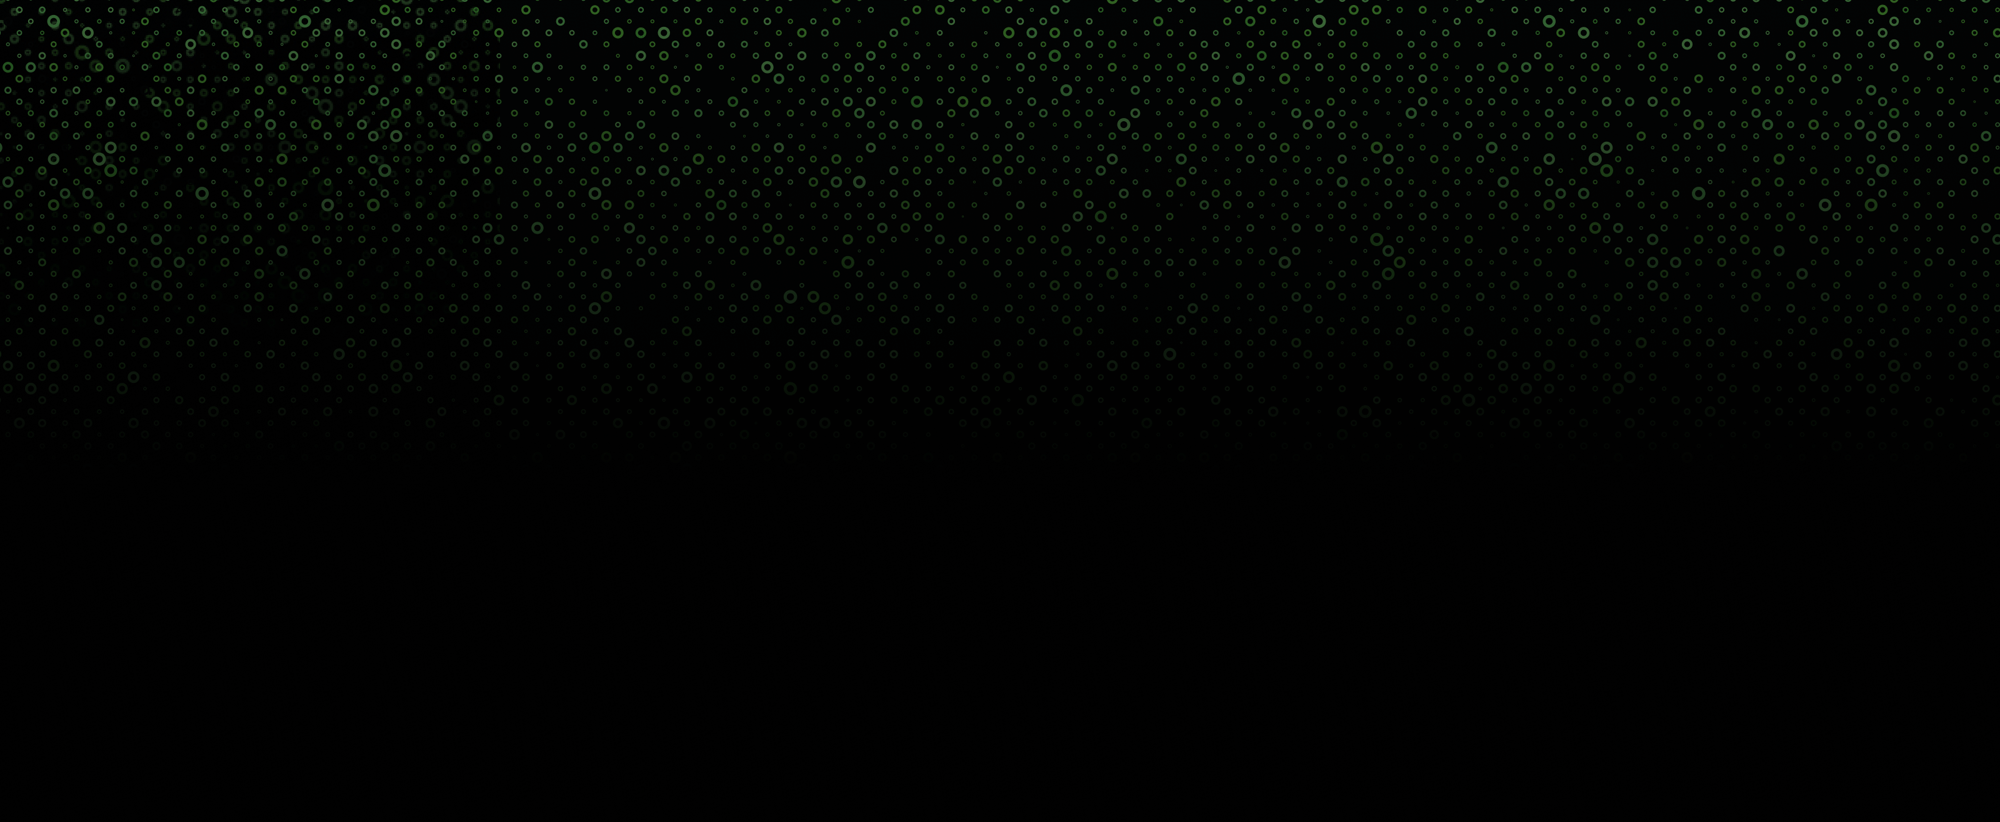 Grid background featuring neon green dots